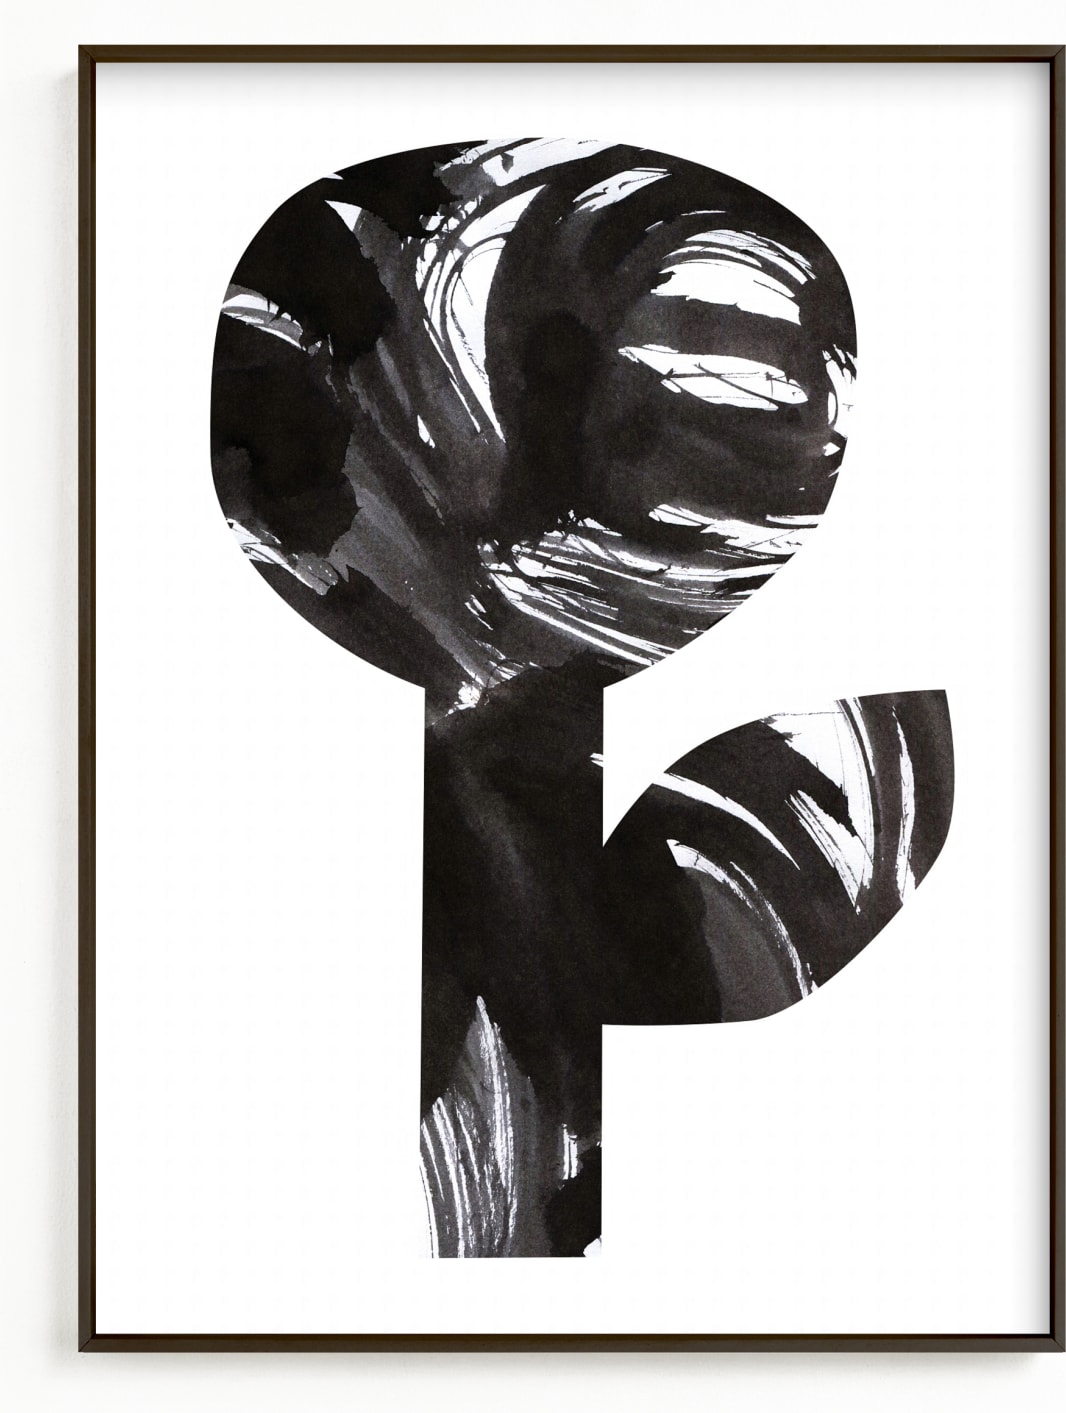 This is a black and white art by Alexandra Dzh called Bold and Graphic Flowers II.